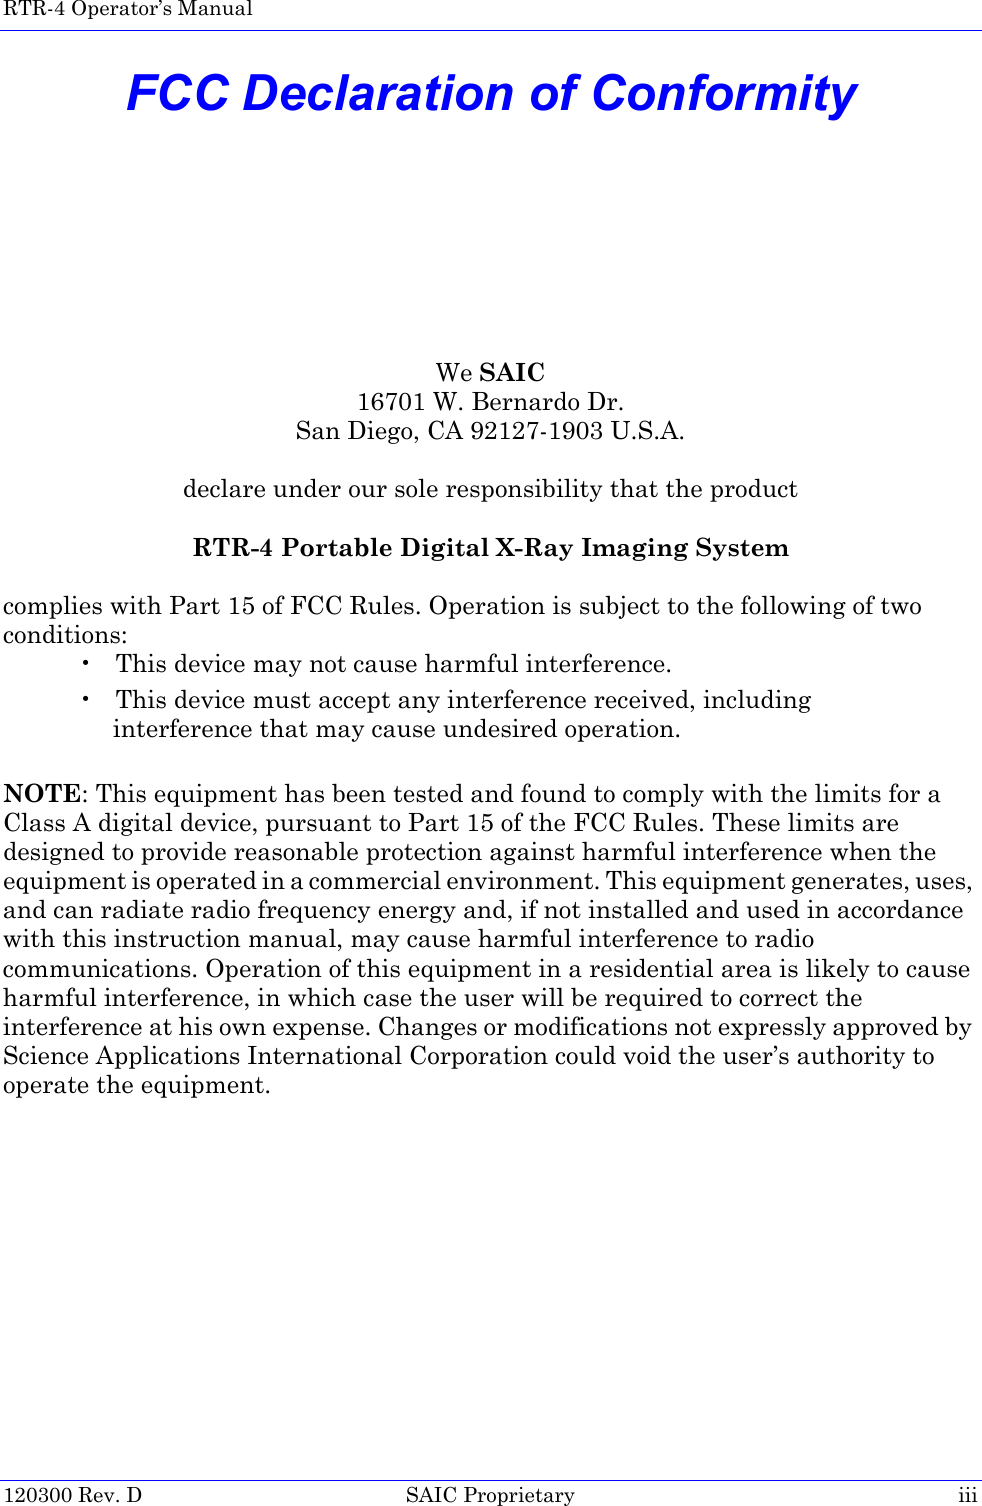 RTR-4 Operator’s Manual  120300 Rev. D SAIC Proprietary iiiFCC Declaration of ConformityWe SAIC16701 W. Bernardo Dr.San Diego, CA 92127-1903 U.S.A.declare under our sole responsibility that the productRTR-4 Portable Digital X-Ray Imaging Systemcomplies with Part 15 of FCC Rules. Operation is subject to the following of two conditions: • This device may not cause harmful interference.• This device must accept any interference received, including interference that may cause undesired operation. NOTE: This equipment has been tested and found to comply with the limits for a Class A digital device, pursuant to Part 15 of the FCC Rules. These limits are designed to provide reasonable protection against harmful interference when the equipment is operated in a commercial environment. This equipment generates, uses, and can radiate radio frequency energy and, if not installed and used in accordance with this instruction manual, may cause harmful interference to radio communications. Operation of this equipment in a residential area is likely to cause harmful interference, in which case the user will be required to correct the interference at his own expense. Changes or modifications not expressly approved by Science Applications International Corporation could void the user’s authority to operate the equipment.